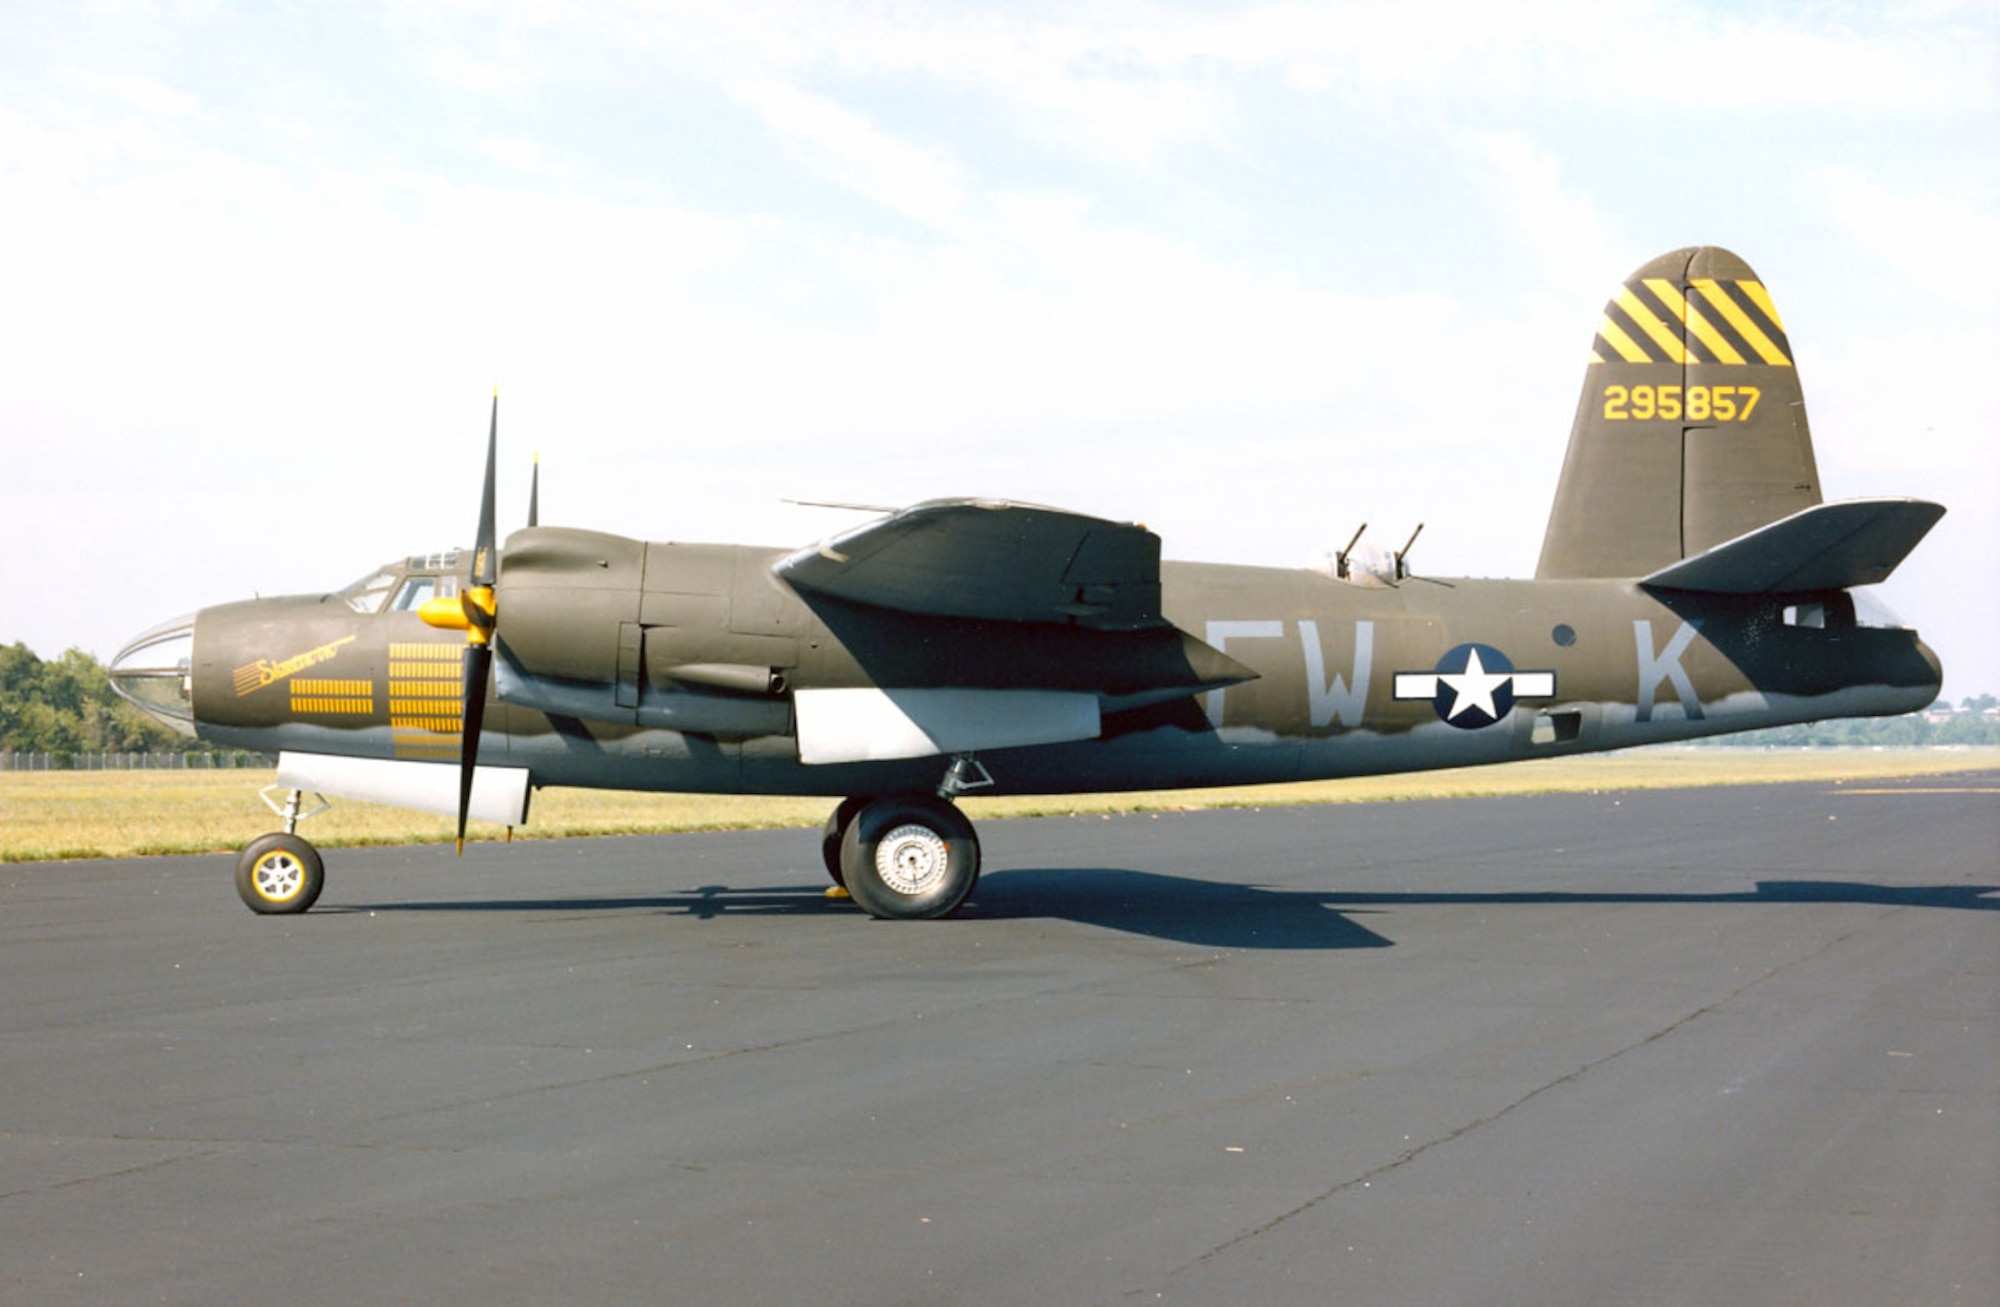 DAYTON, Ohio -- Martin B-26G Marauder at the National Museum of the United States Air Force. (U.S. Air Force photo)